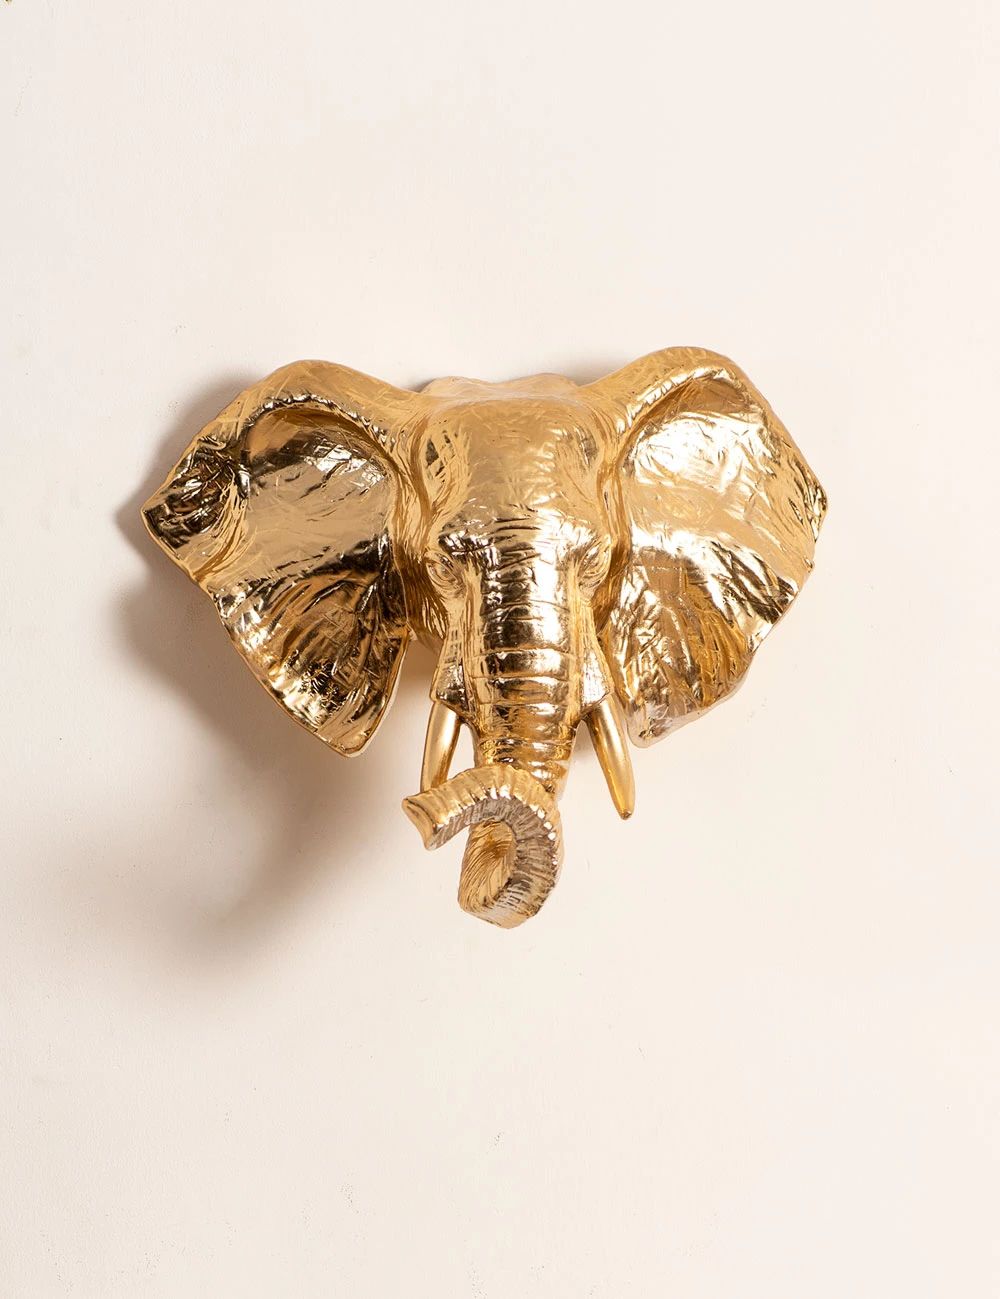 Gold Elephants Sculpture Wall Décor Within Most Current Wall Mounted Gold Elephant Sculpture (Photo 6 of 20)